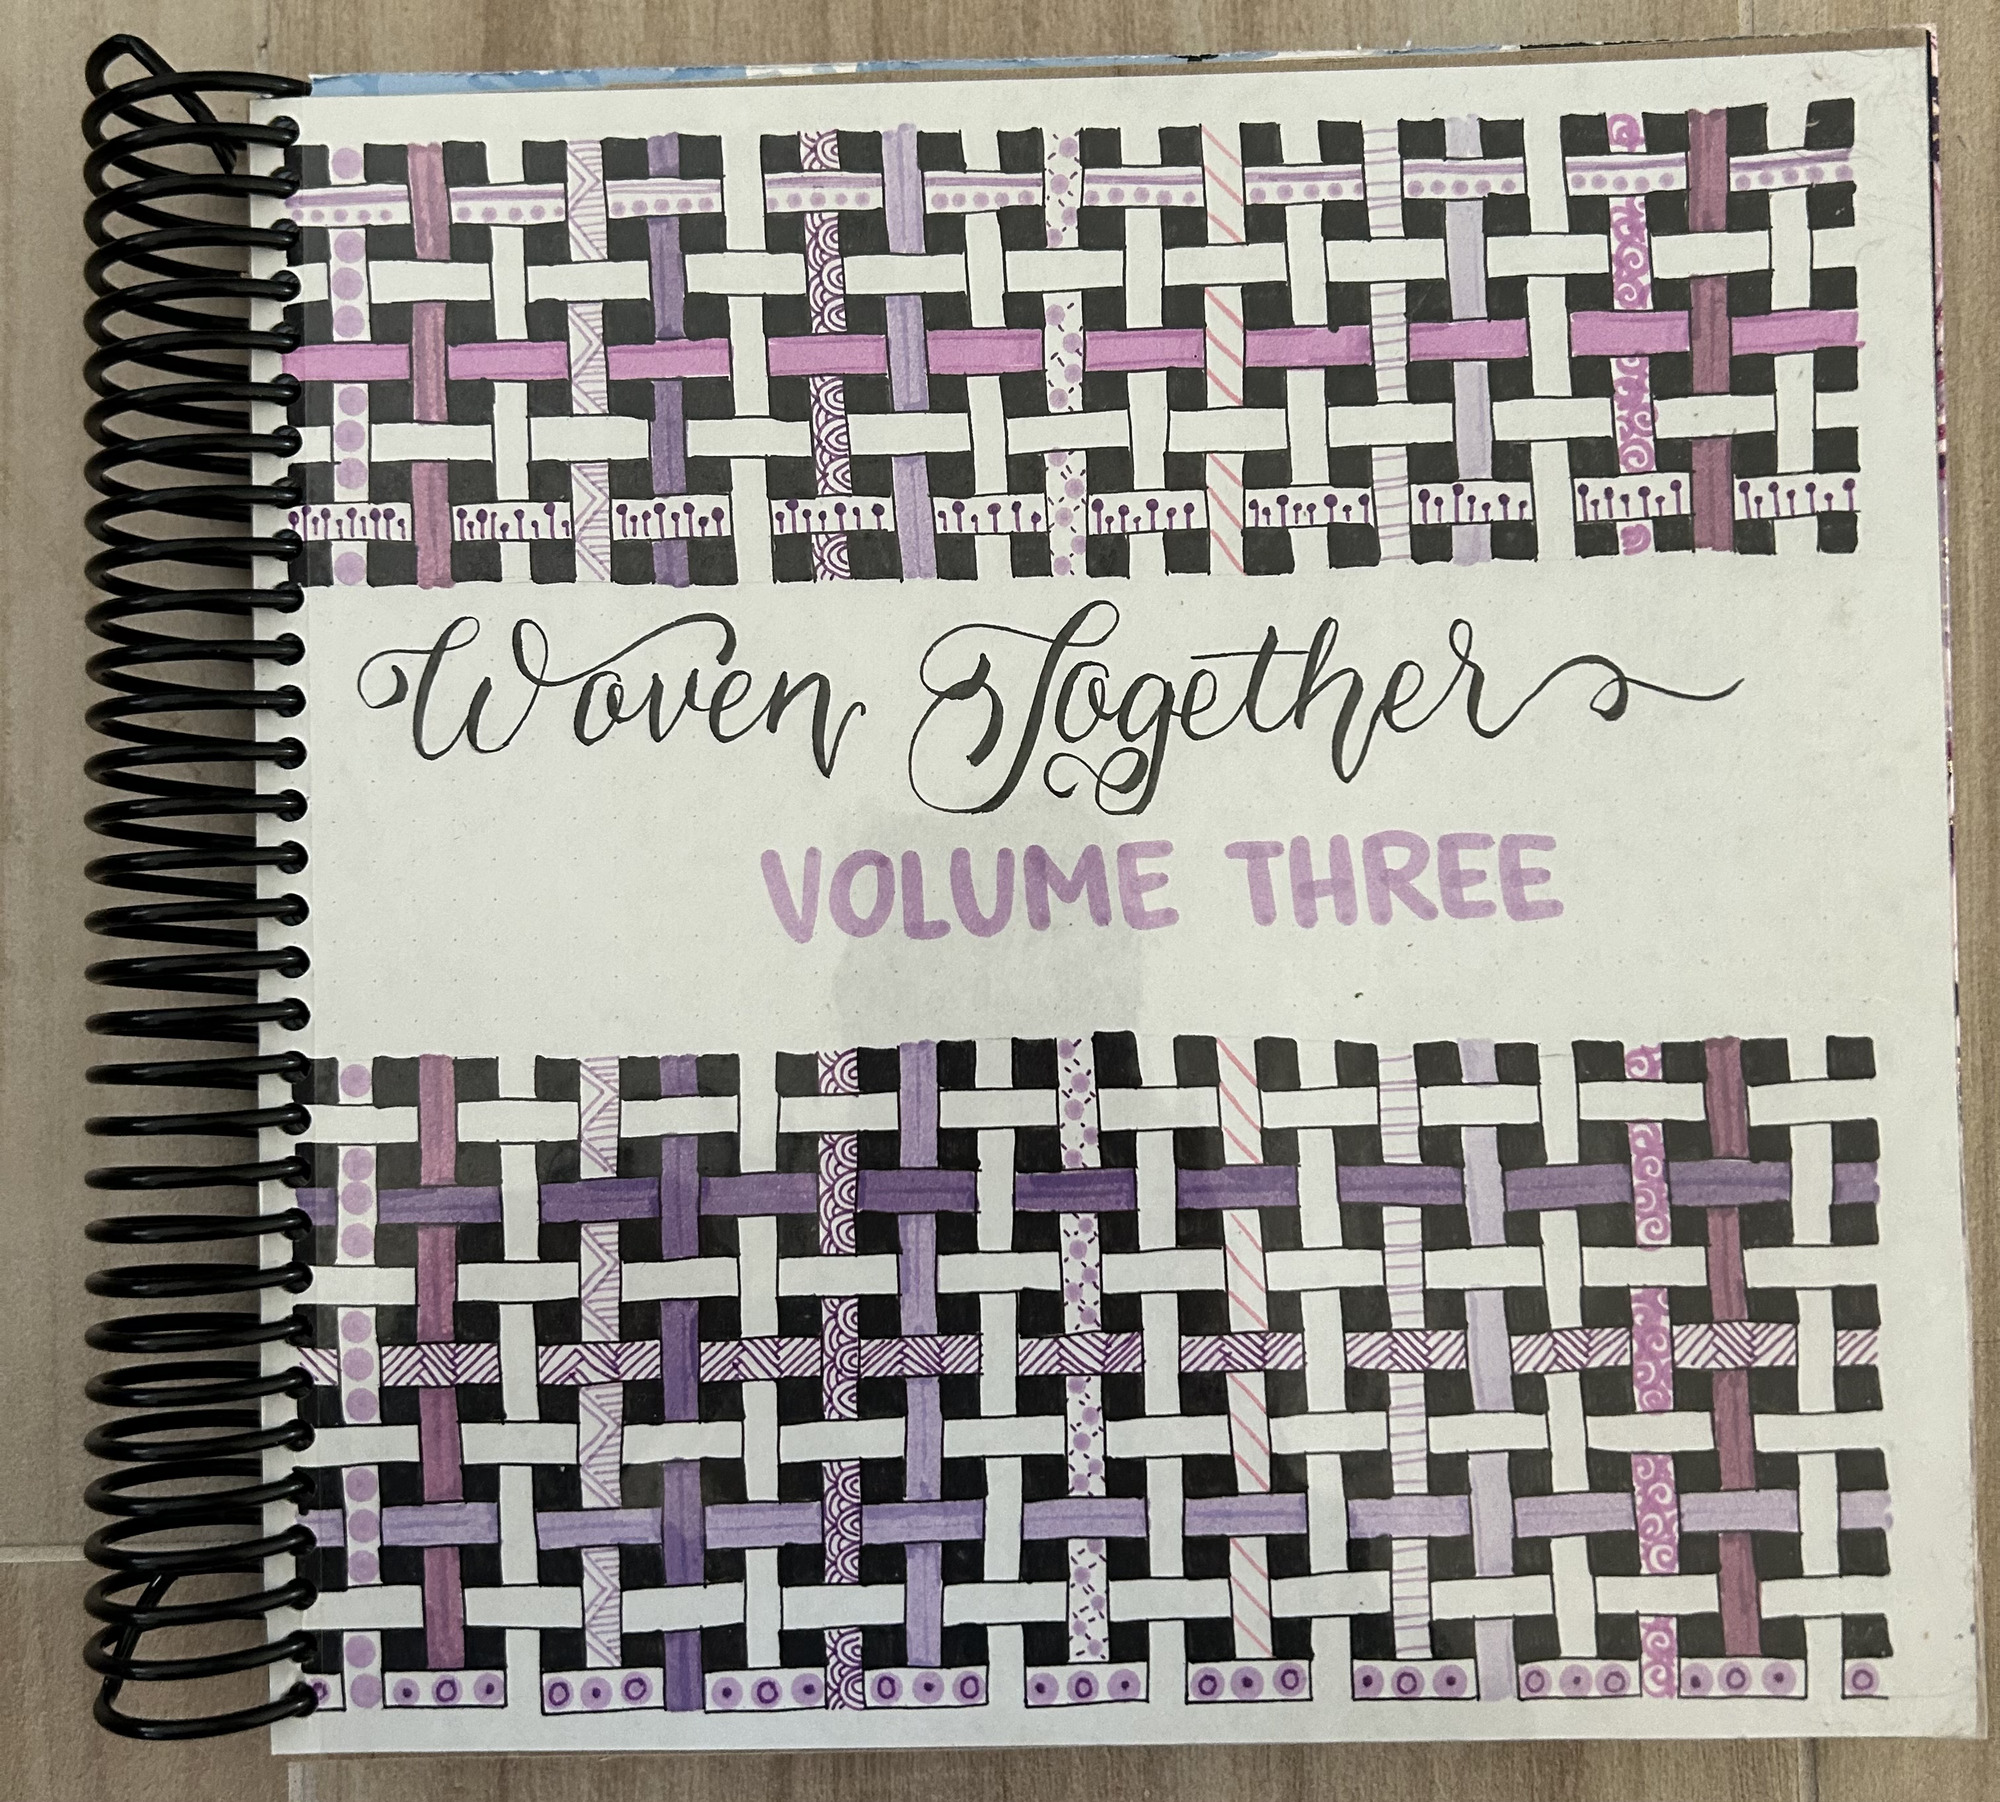 Woven Together: Volume Three